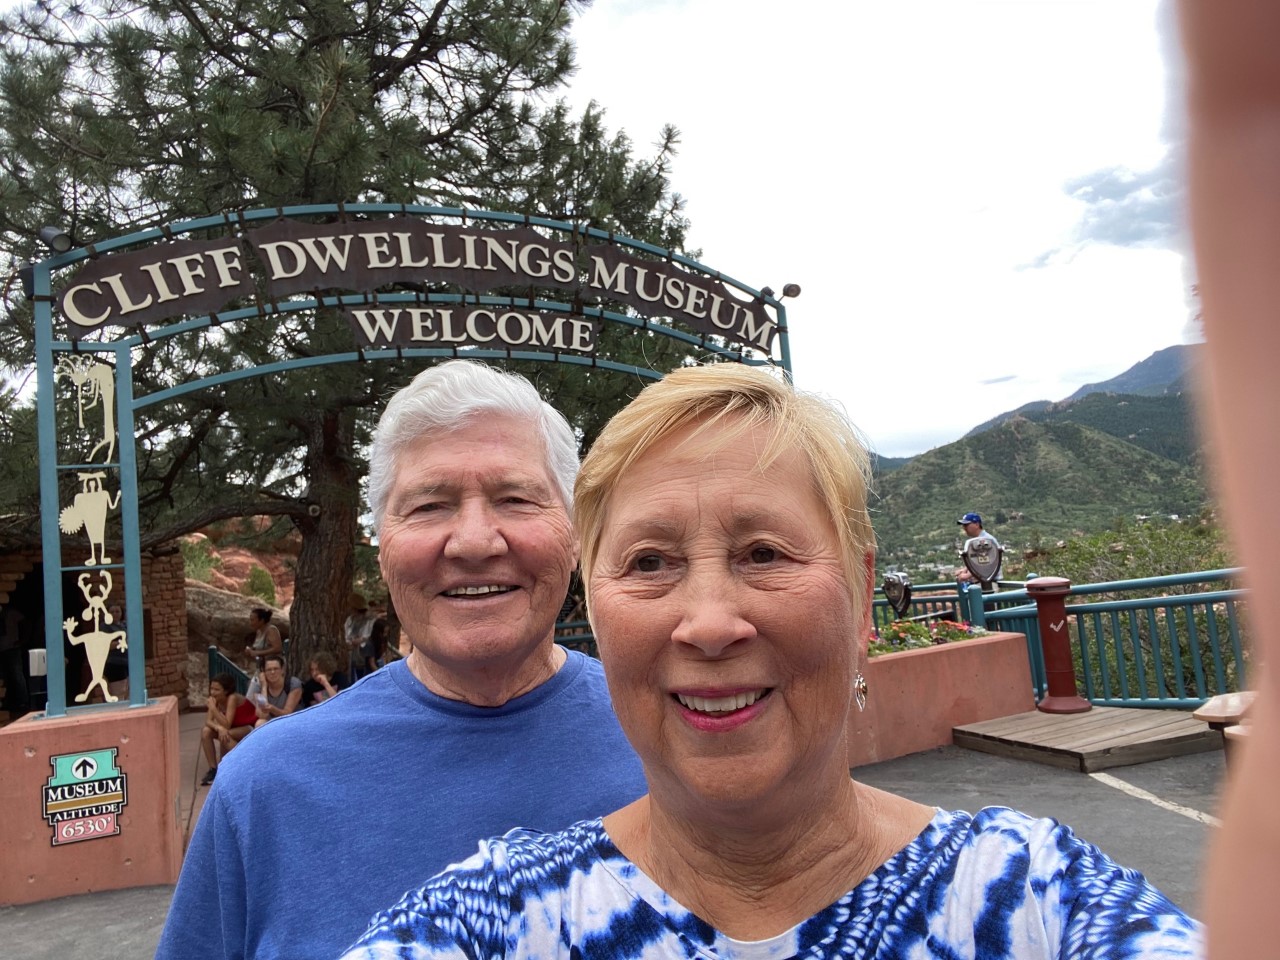 Smile! We are at the Manitou Springs Cliff Dwellings.